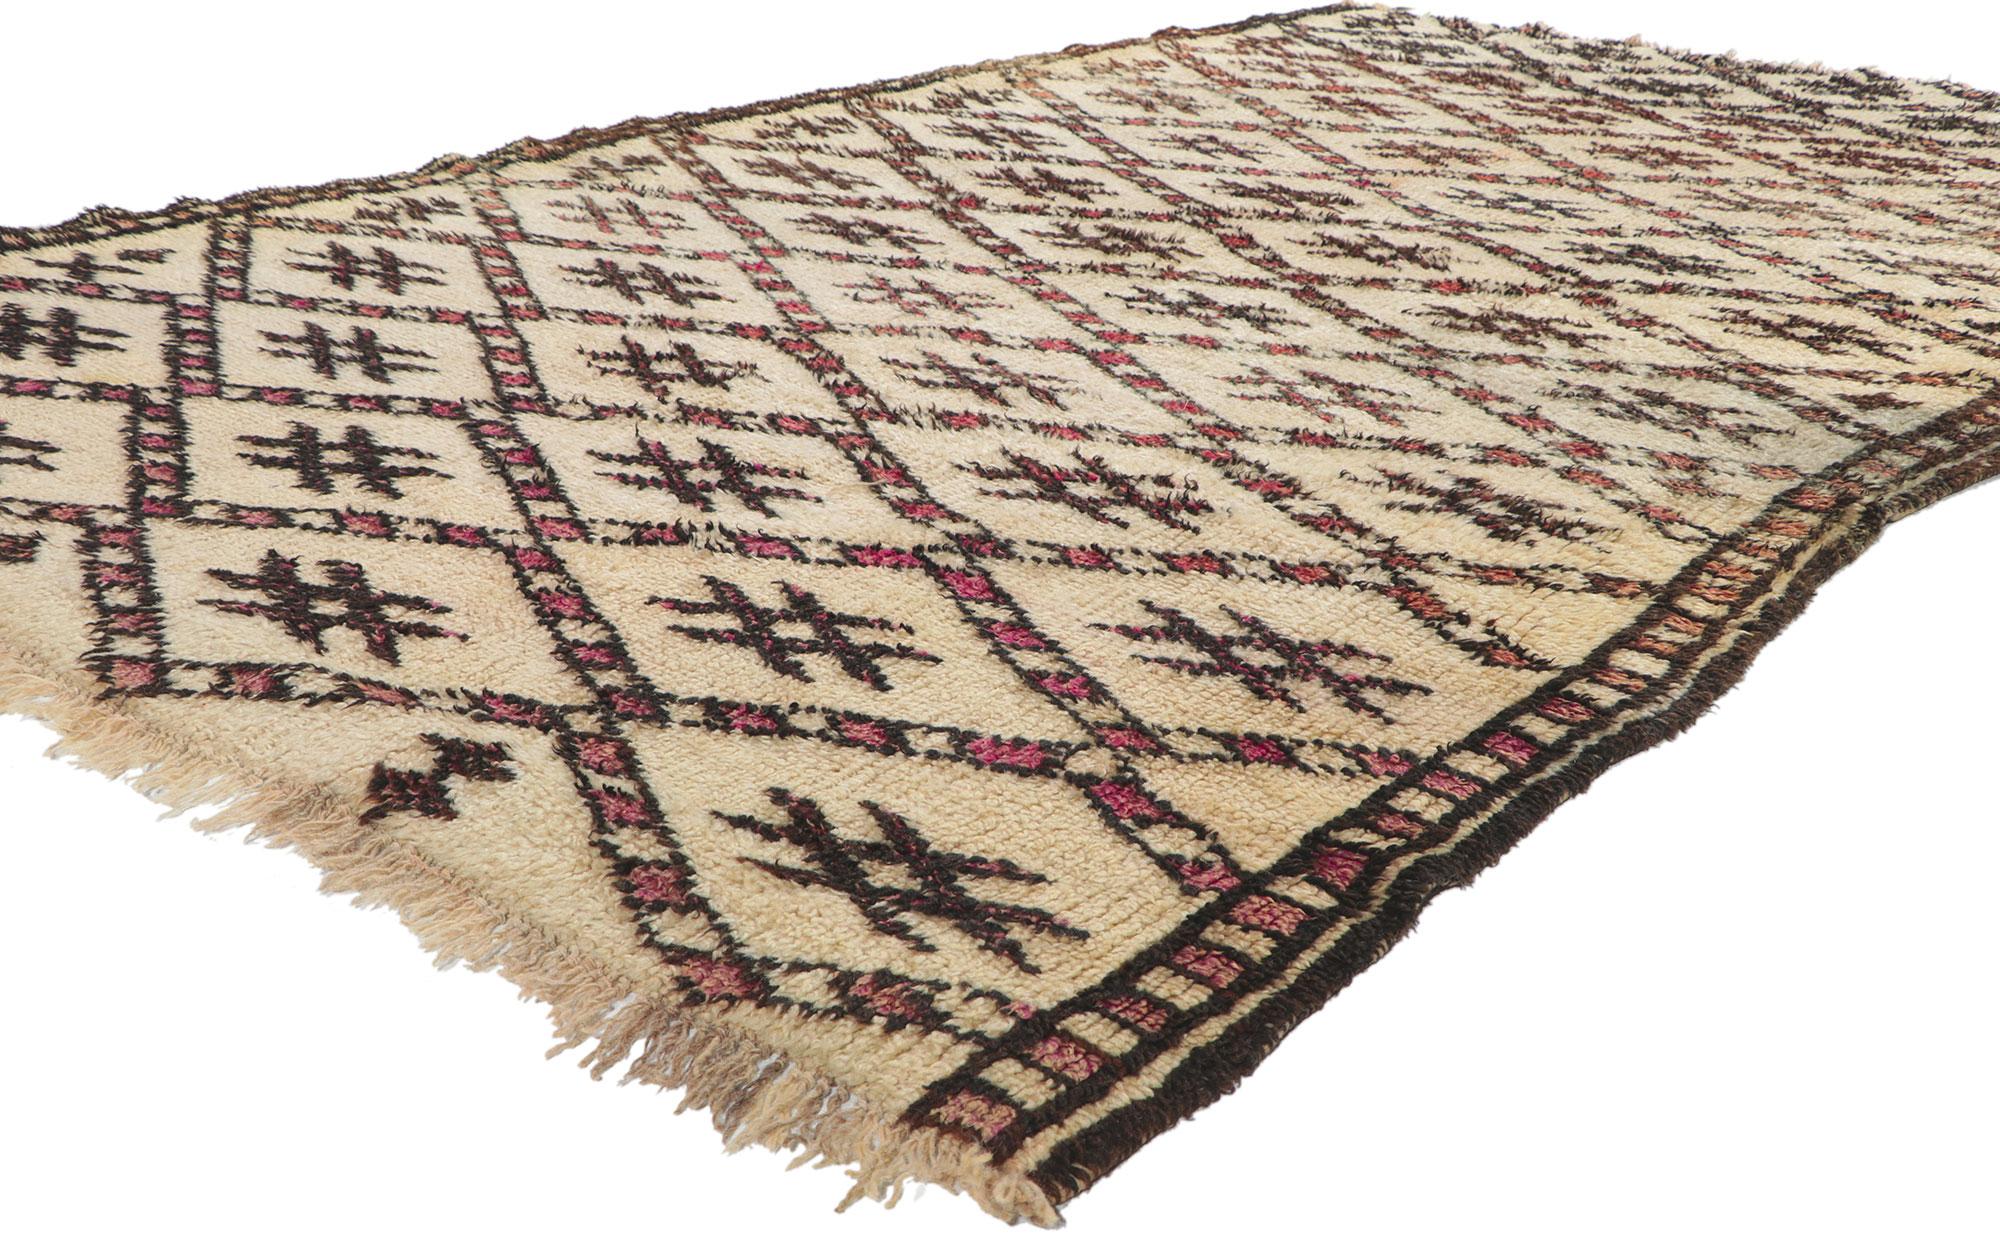 78366 vintage Moroccan Beni Ourain rug, 06'00 x 10'01. With its Midcentury Modern style, incredible detail and texture, this hand knotted wool vintage Beni Ourain Moroccan rug is a captivating vision of woven beauty. The eye-catching diamond trellis